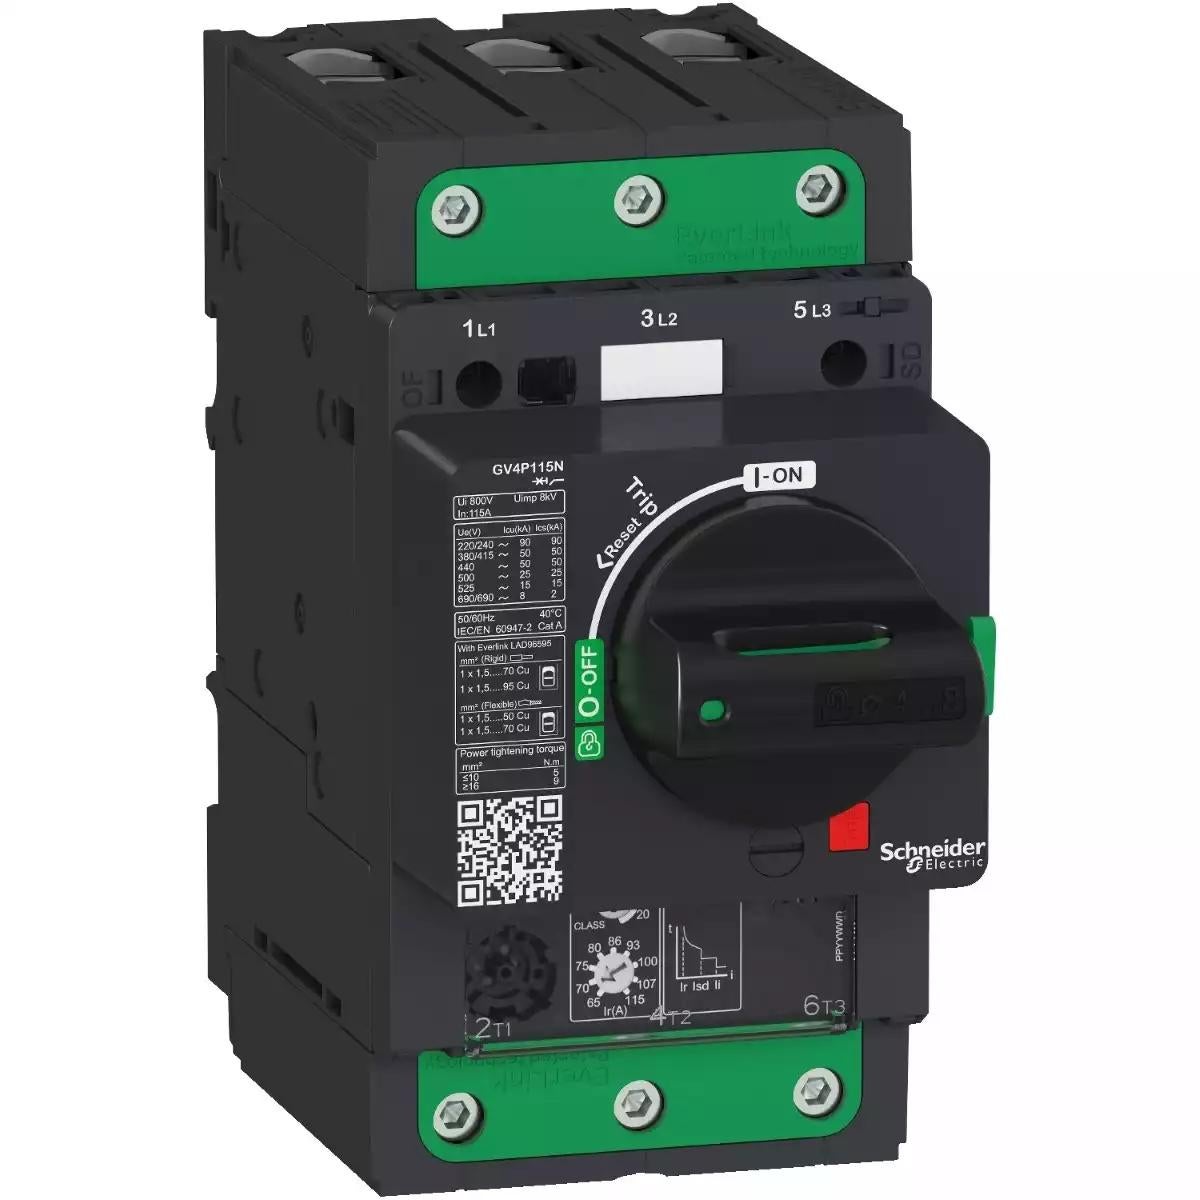 Schneider Electric Motor circuit breaker, TeSys GV4, 3P, 7A, Icu 50kA, thermal magnetic, Everlink terminals